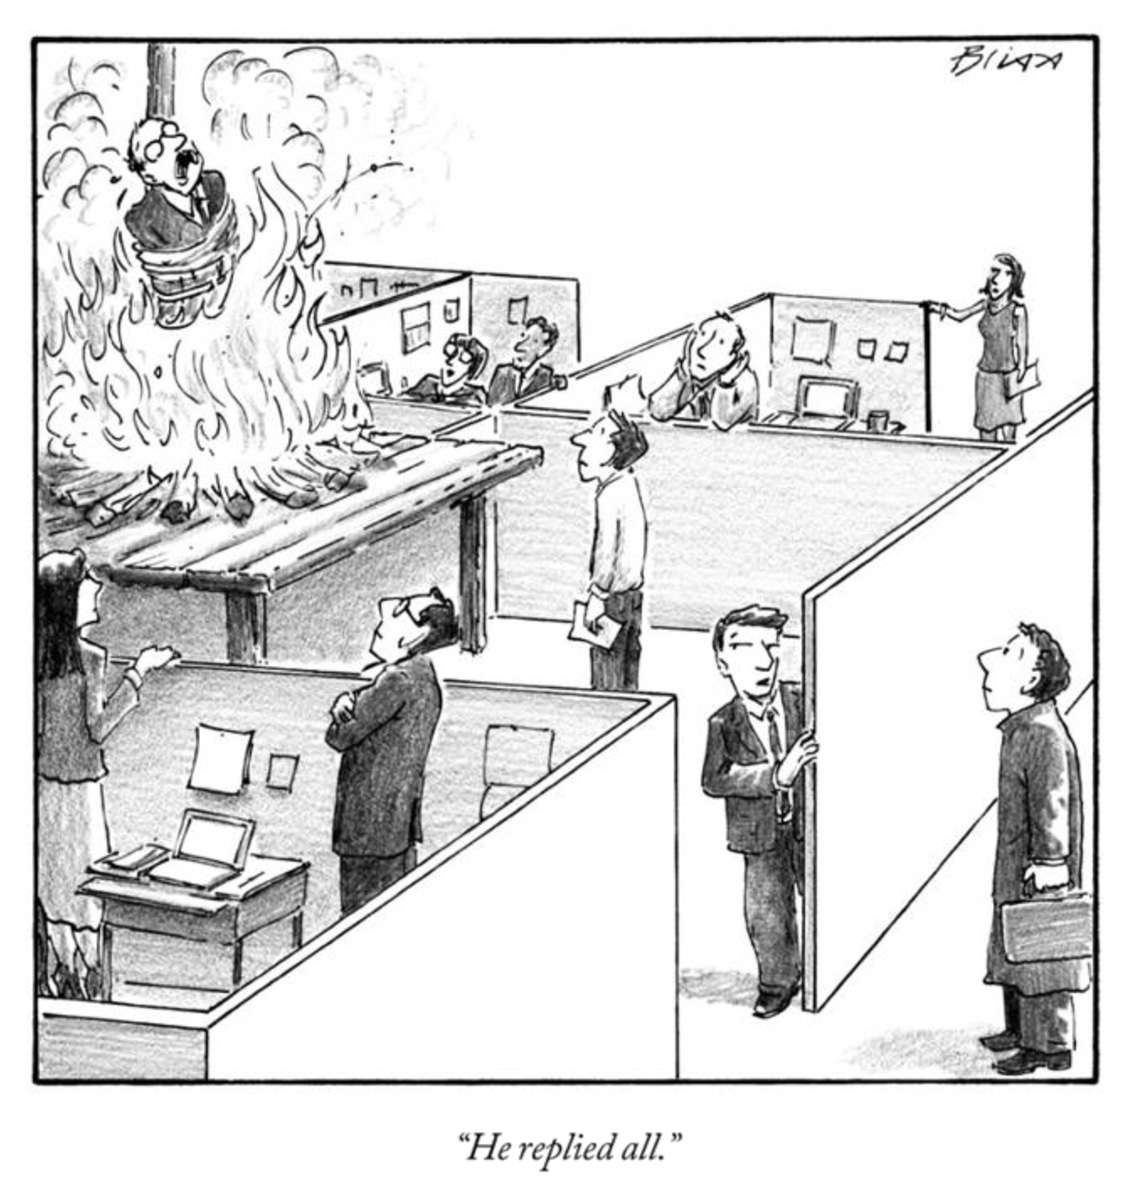 Eric Topol on Twitter: "Email Peril :-) @NewYorker http://t.co/f9t471FAHF"